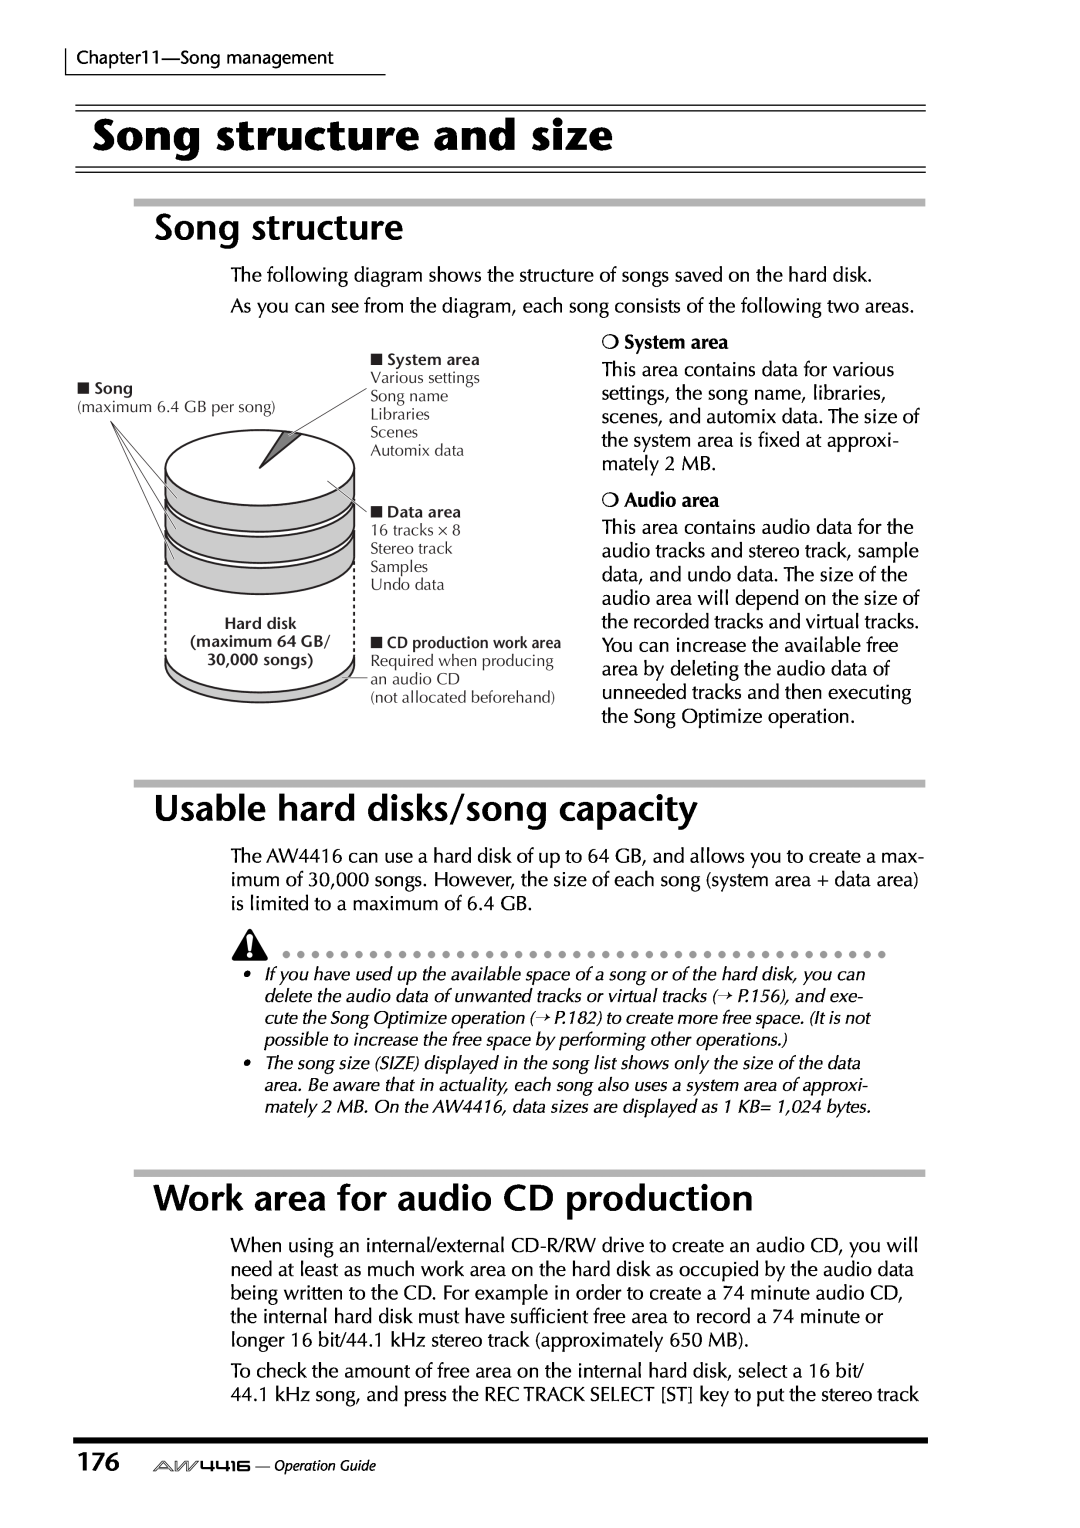 Yamaha AW4416 Song structure and size, Usable hard disks/song capacity, Work area for audio CD production, System area 